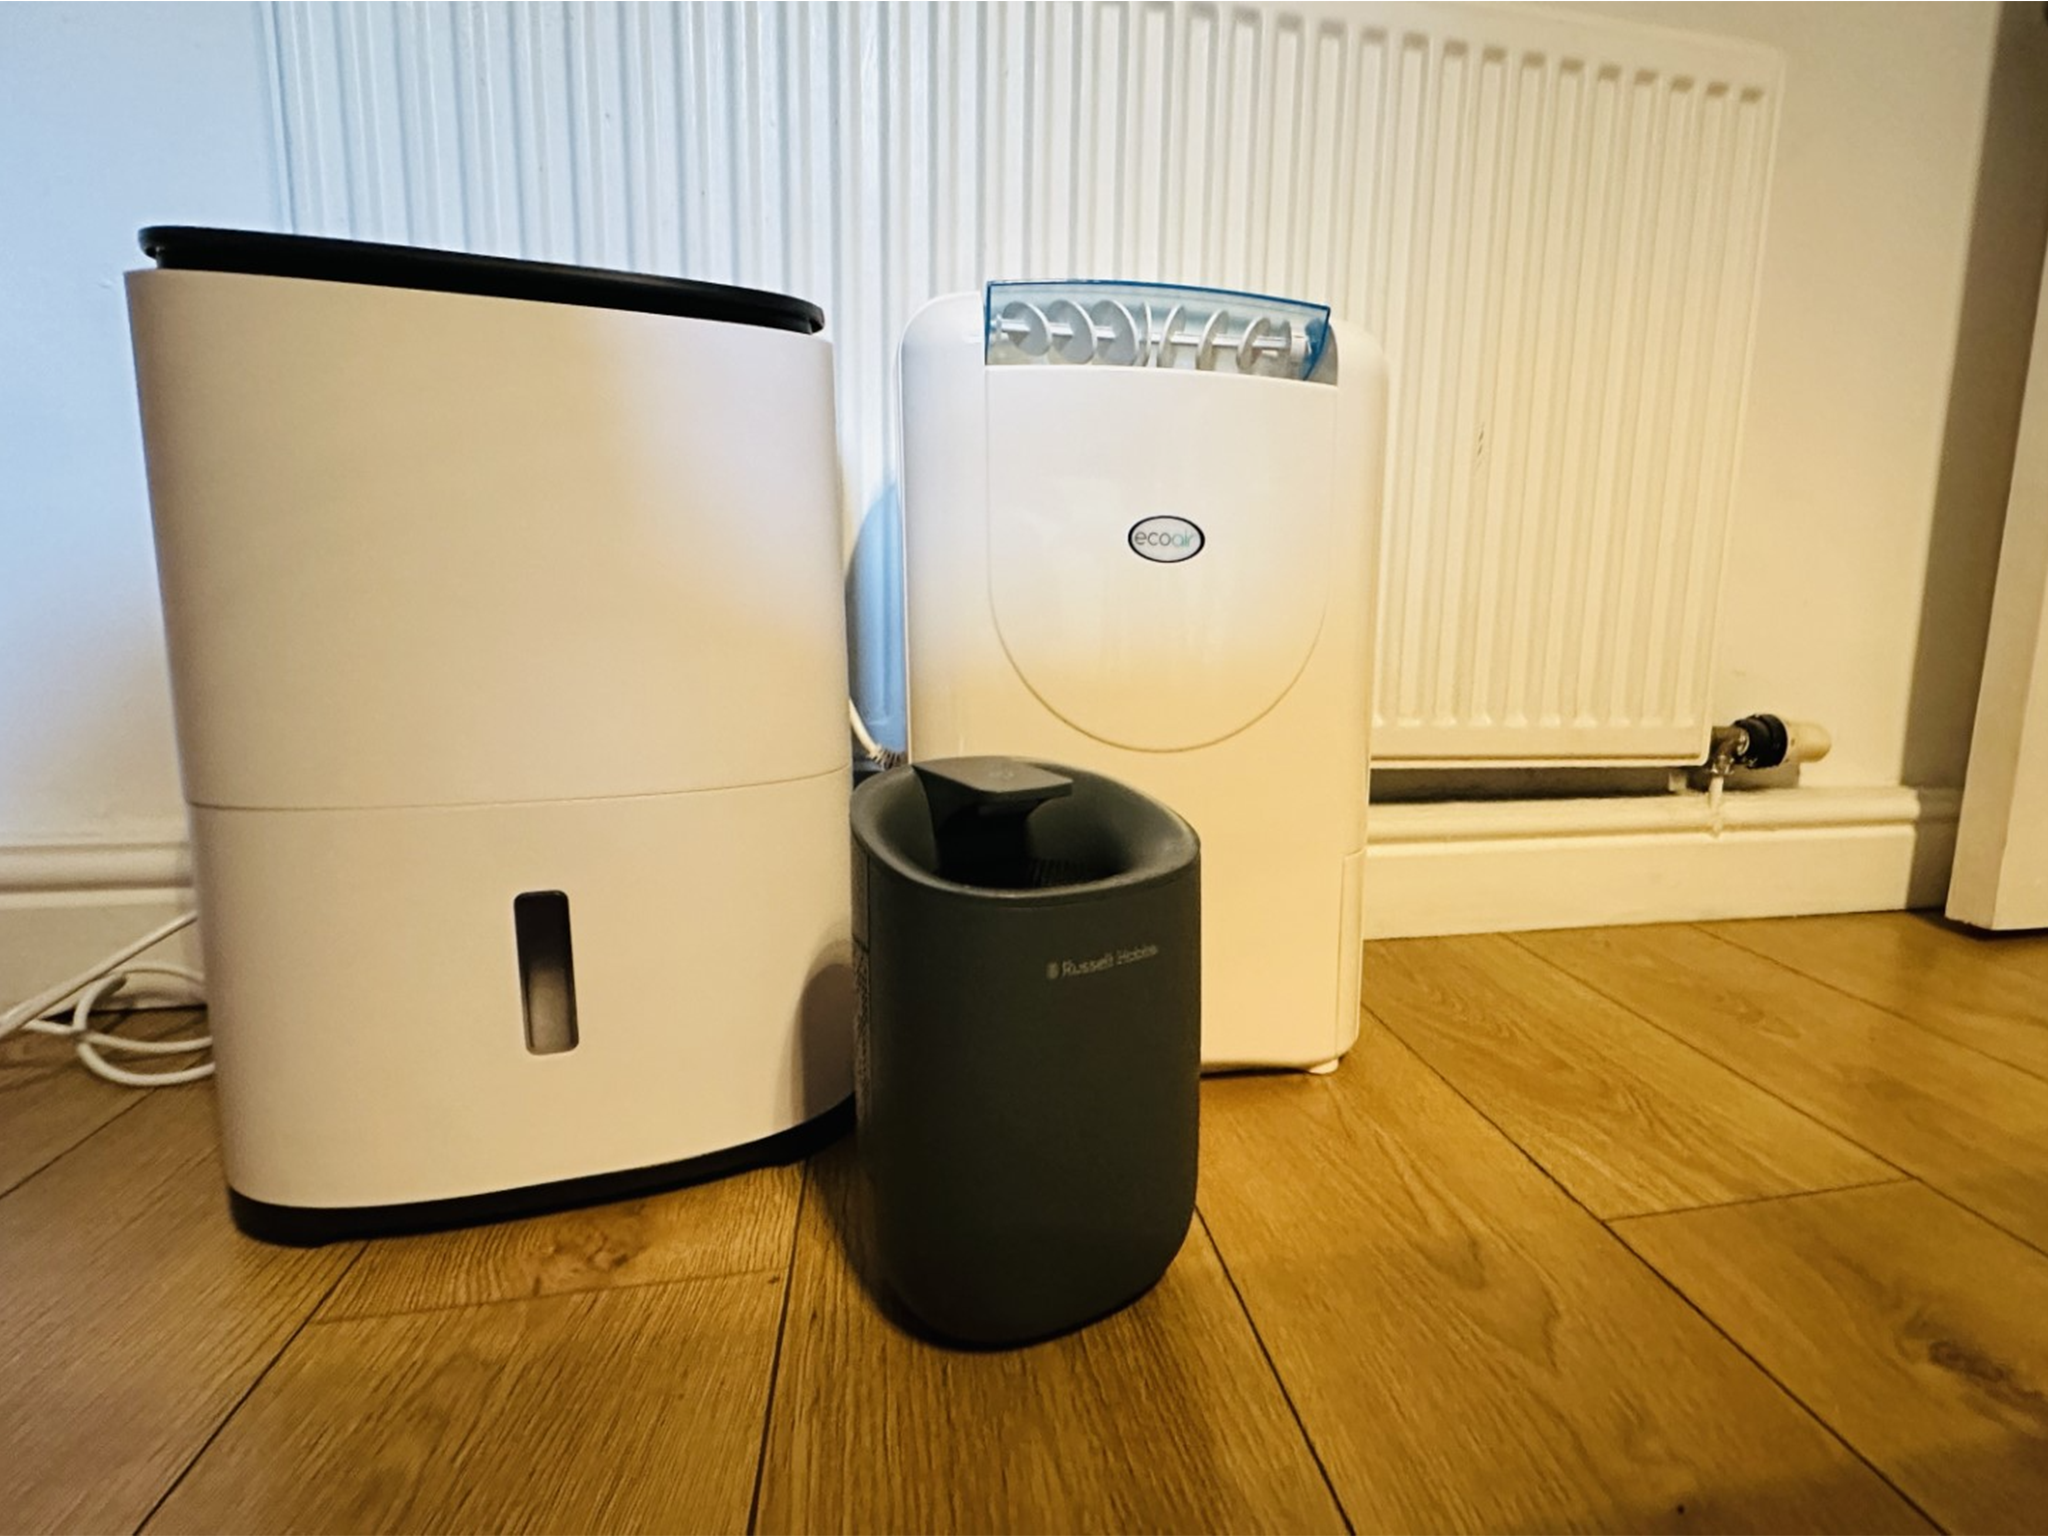 A selection of the best dehumidifiers that we tested for this review